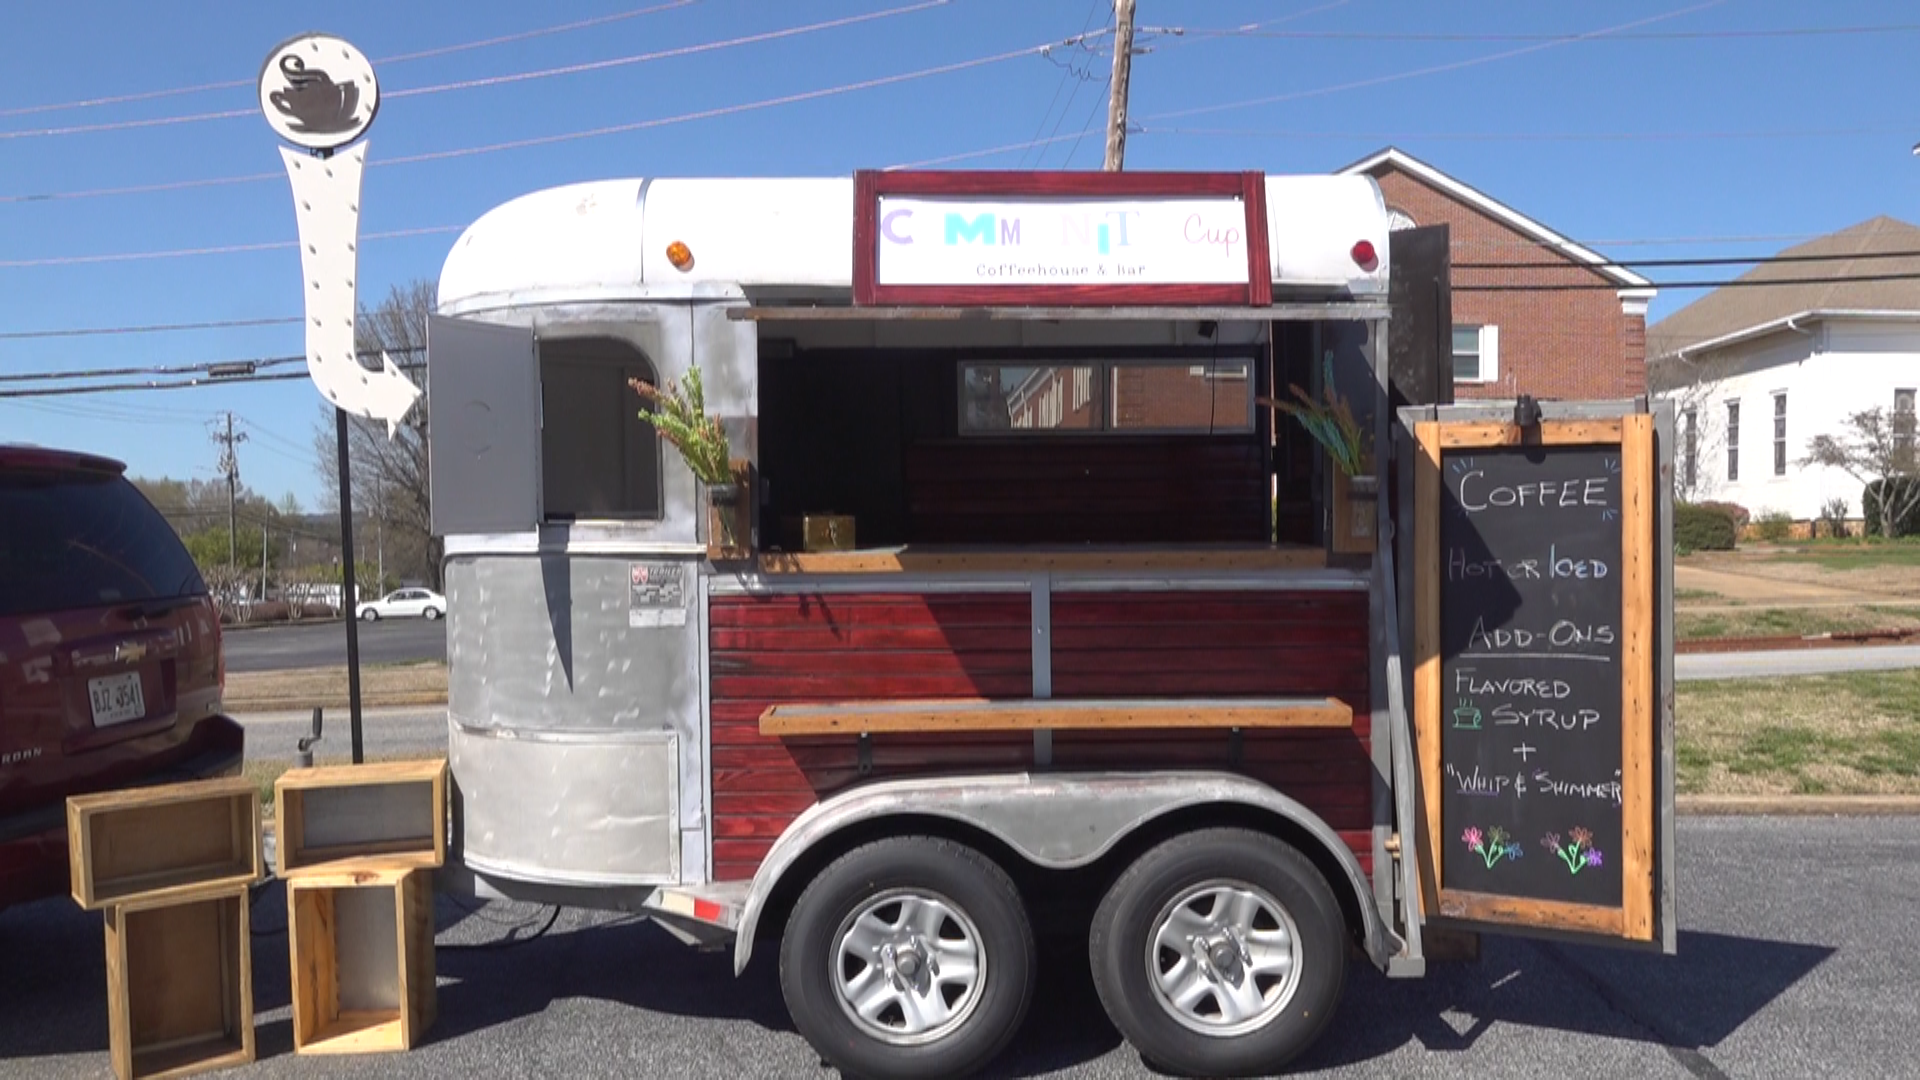 The owner of a popular coffee shop has teamed up with one of her customers, and their mobile coffee trailer is catching the attention of many.